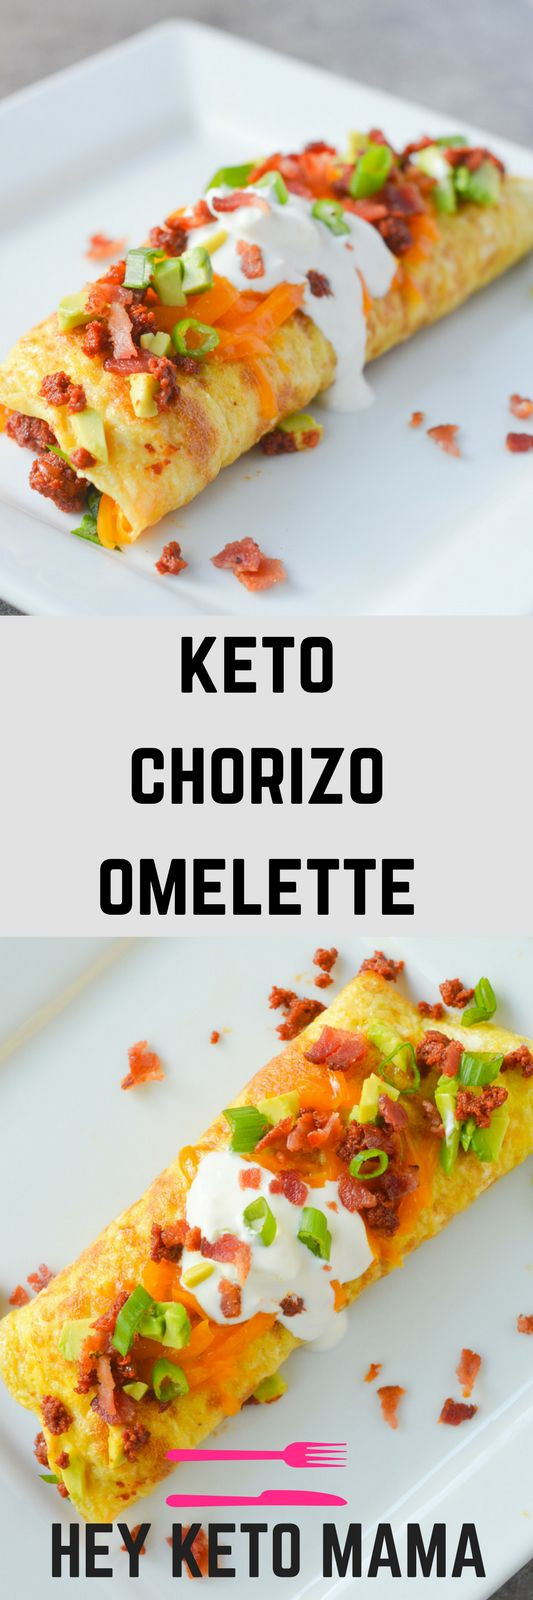 Can You Eat Beans On A Keto Diet
 The 25 best Keto foods ideas on Pinterest